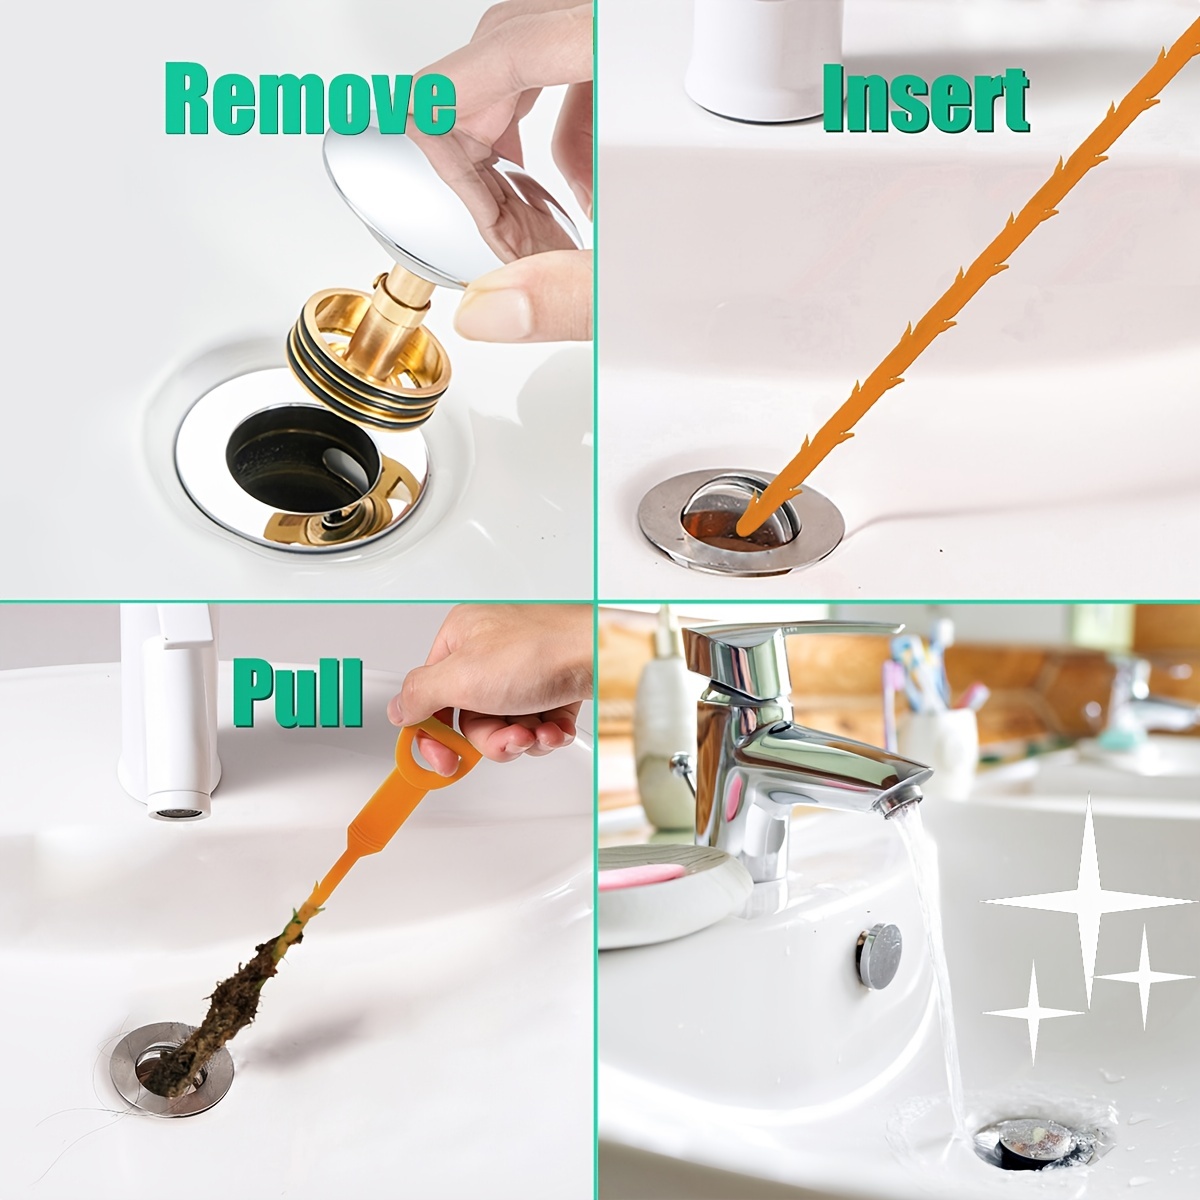 Drain Remover - Hair Removal Tool Used To Unclog Sinks, Tub Drains